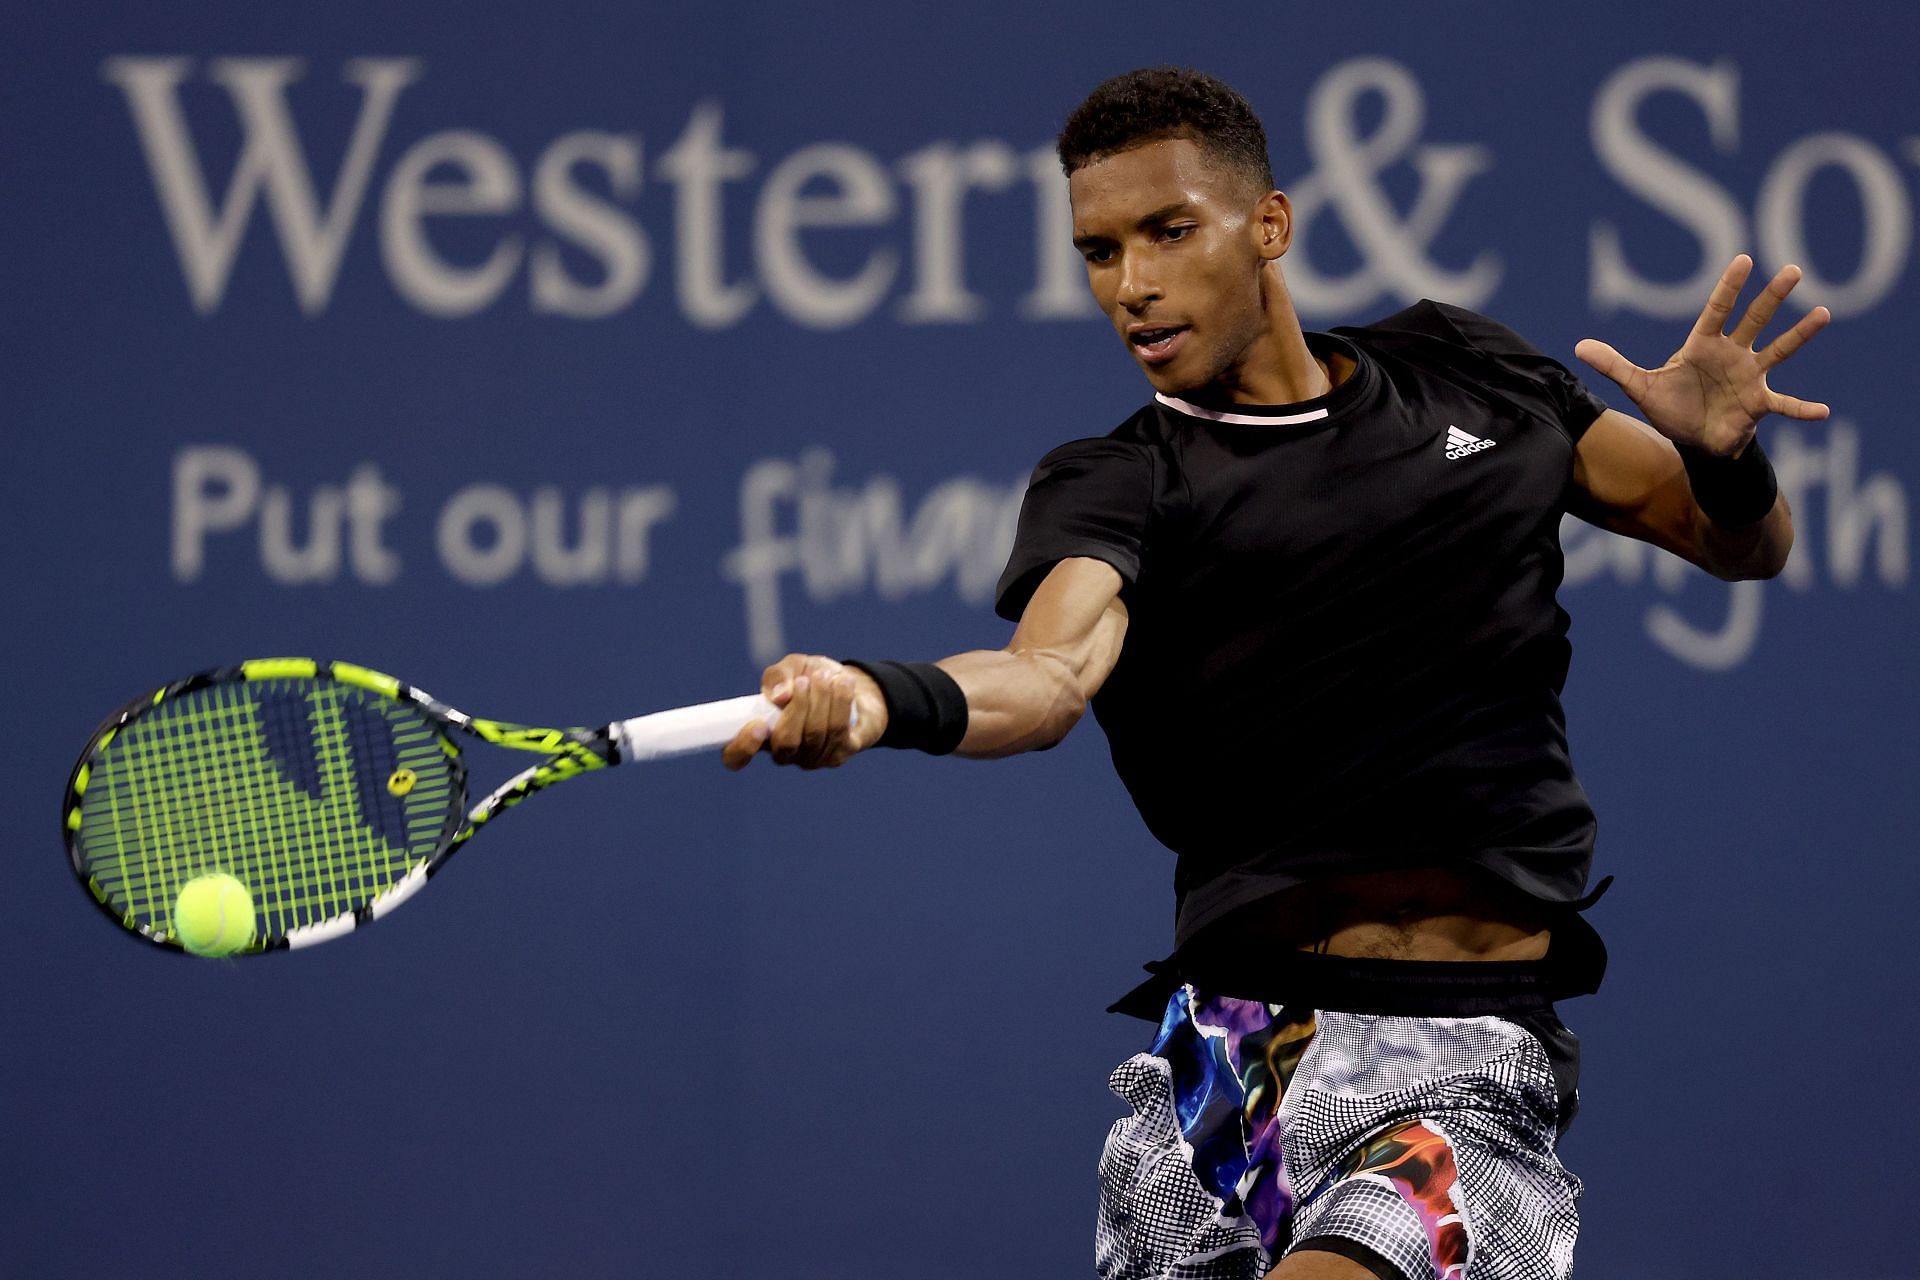 Felix Auger-Aliassime edged over 10th seed Jannik Sinner 2-6, 7-6 (1), 6-1 in a tight clash